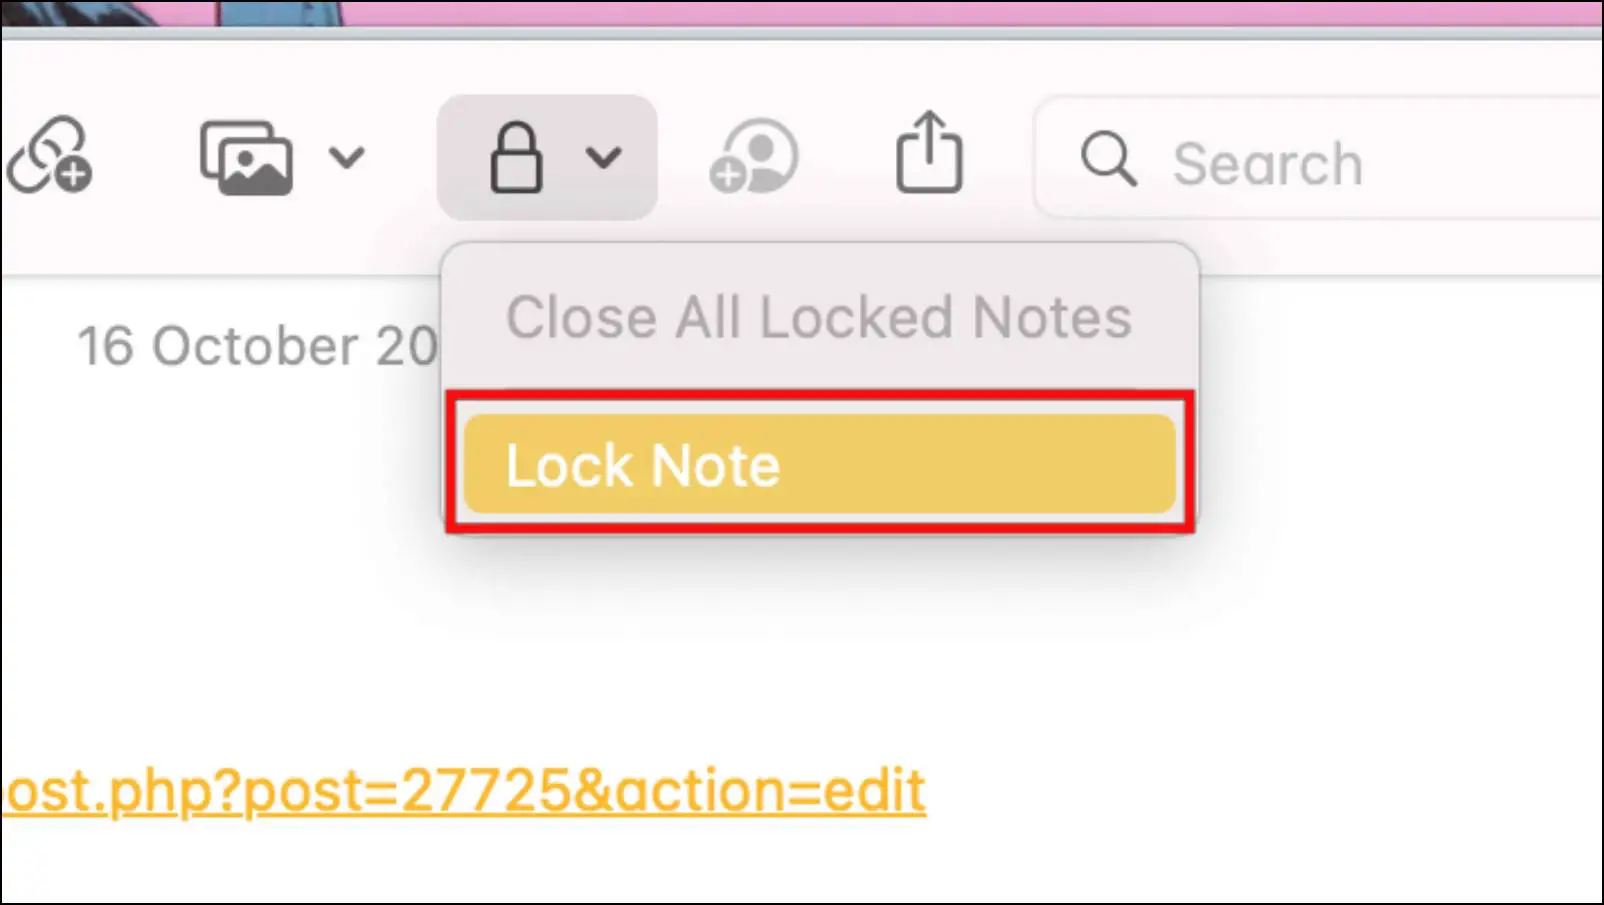 Lock the Note by Clicking on the Padlock icon. 